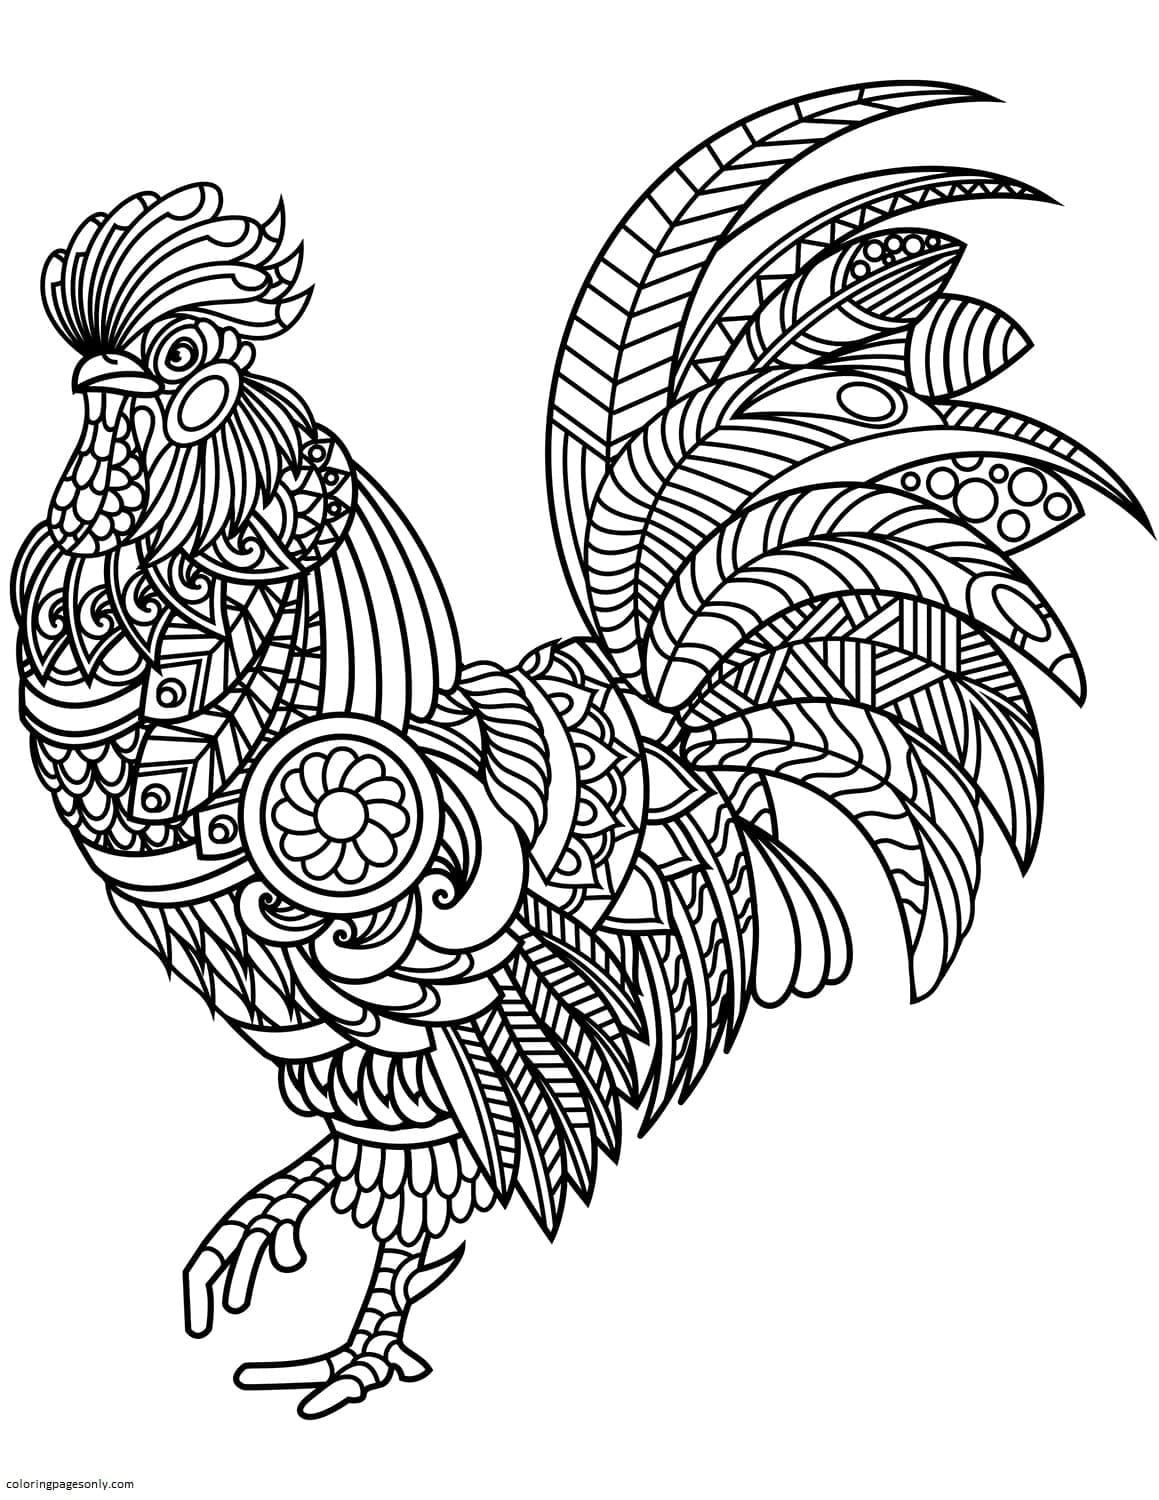 Rooster Zentangle Coloring Pages